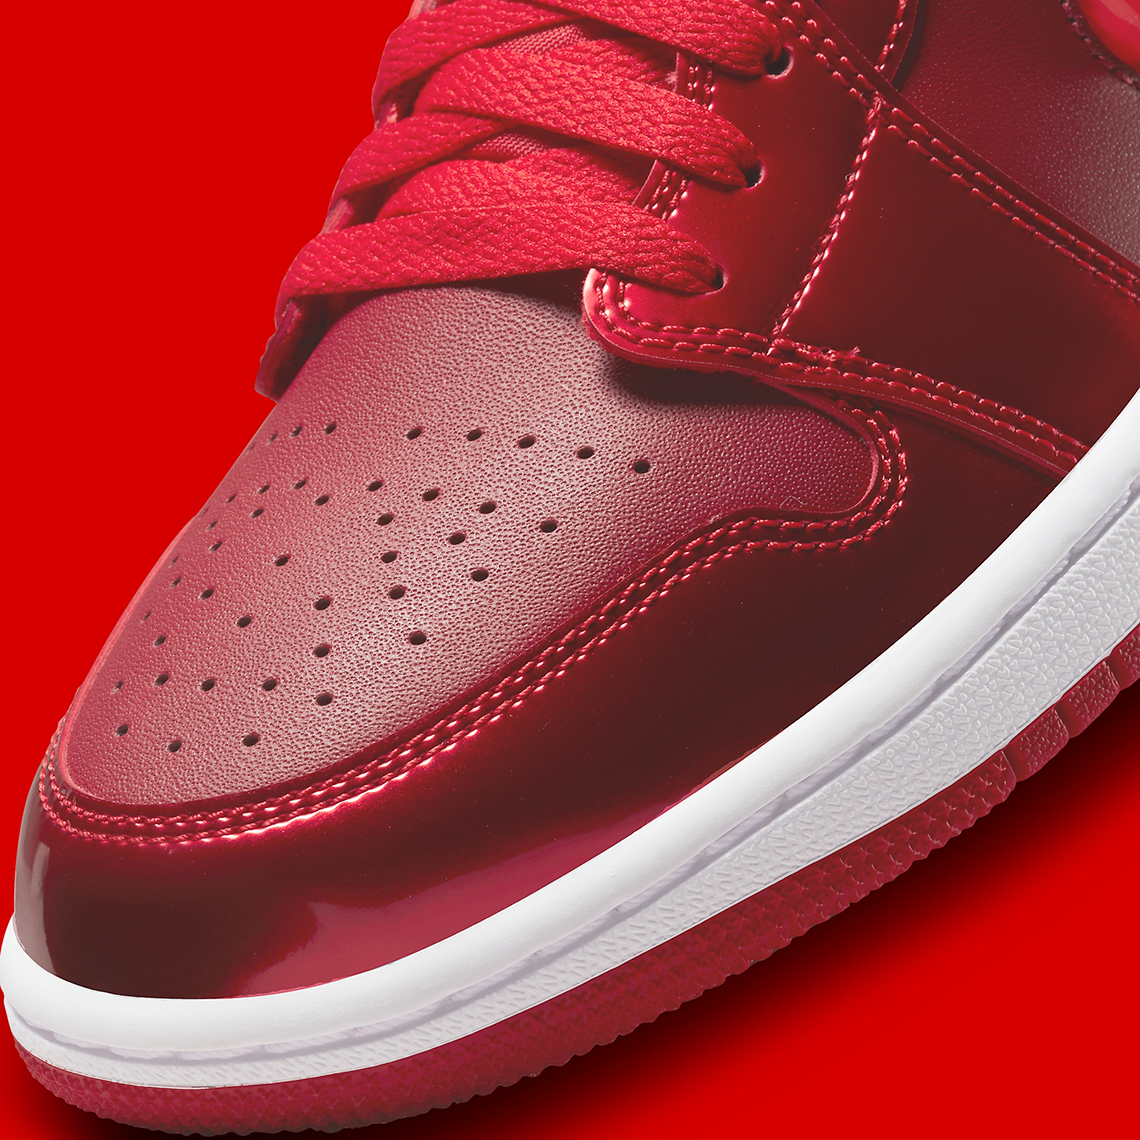 SBD, Air Jordan 1 Low Pomegranate Features Large Jeweled Swooshes